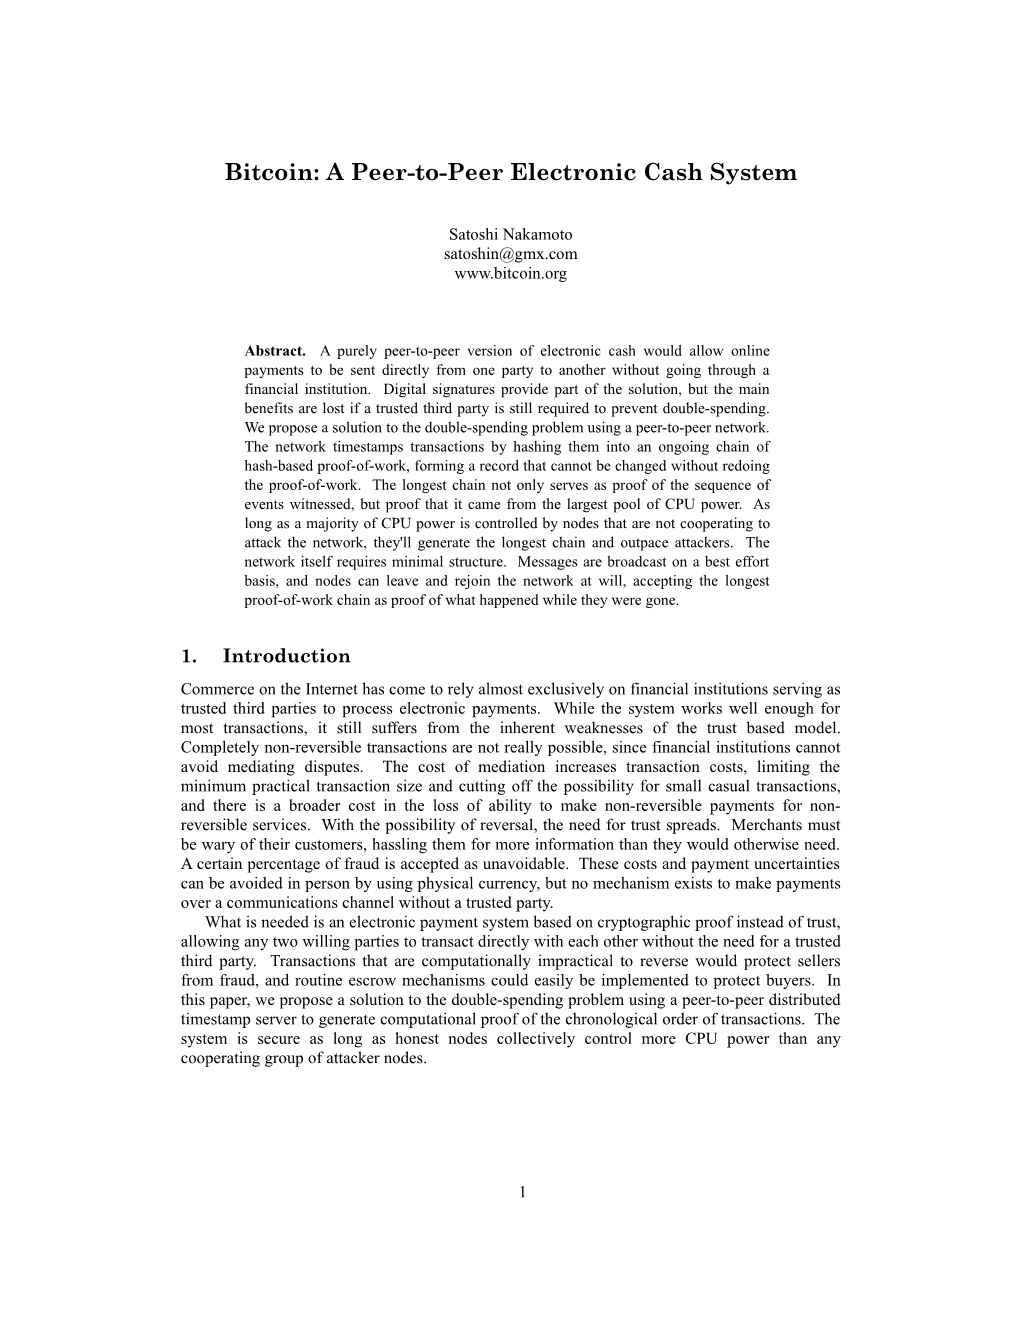 Bitcoin: a Peer-To-Peer Electronic Cash System